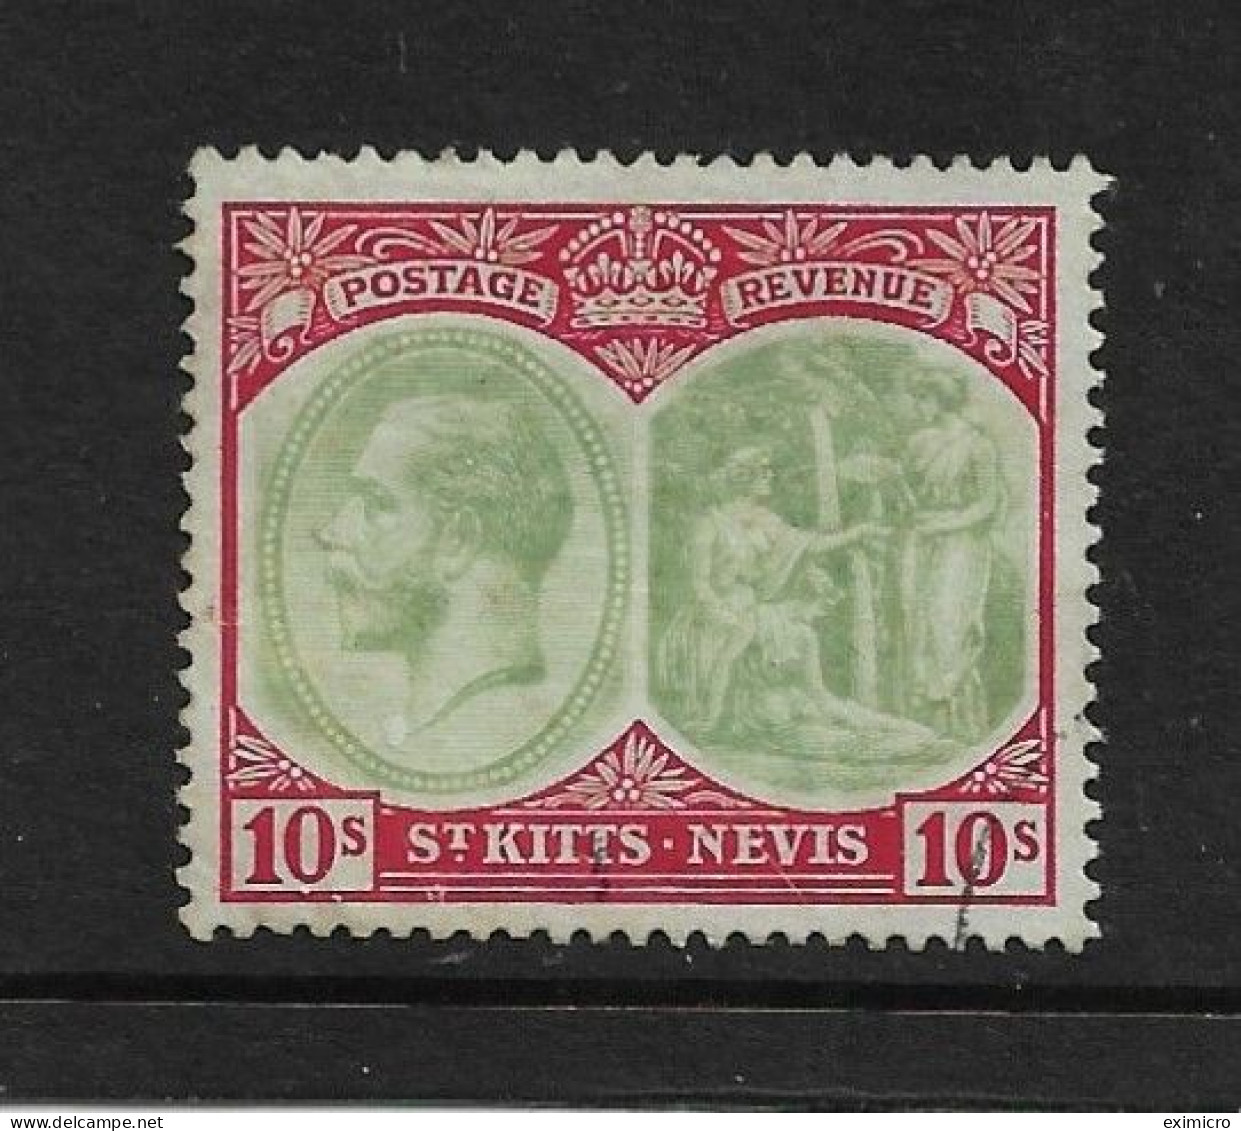 ST. KITTS - NEVIS 1920 - 1922 WATERMARK MULTIPLE CROWN CA 10s SG 35 FINE USED Cat £48 - St.Christopher-Nevis-Anguilla (...-1980)